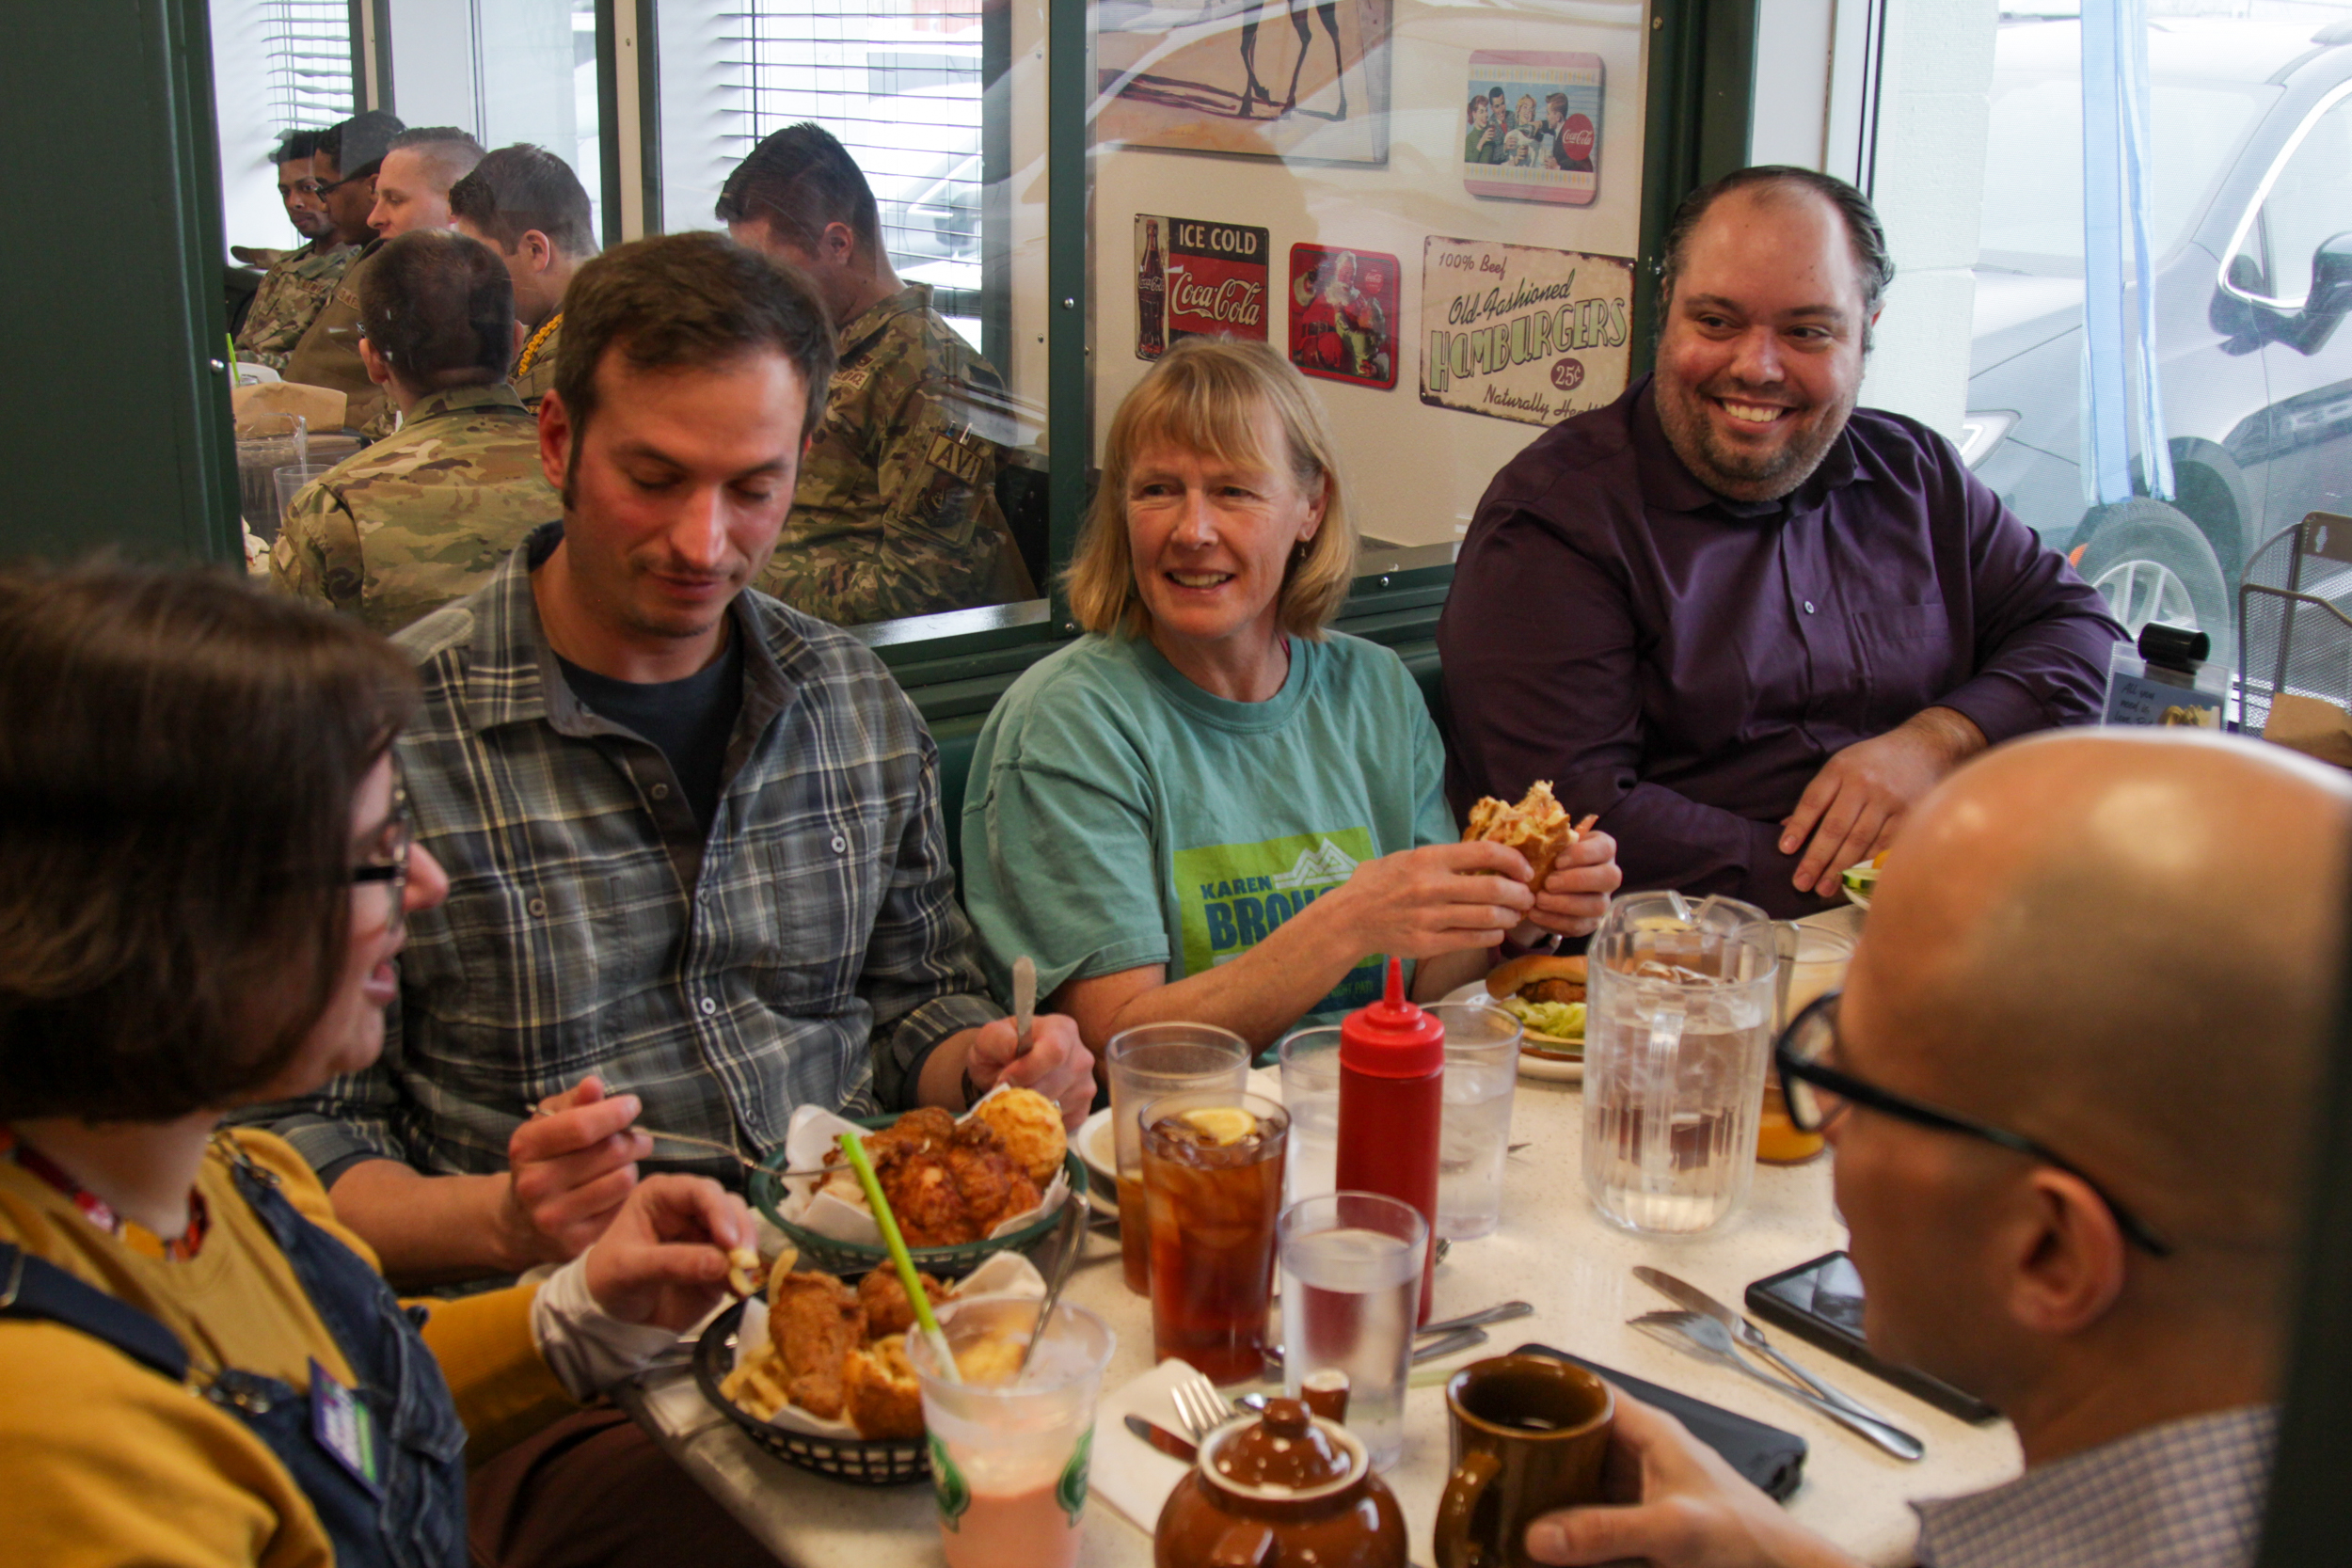 Over a crowded diner table, a group of adults talk and laugh.